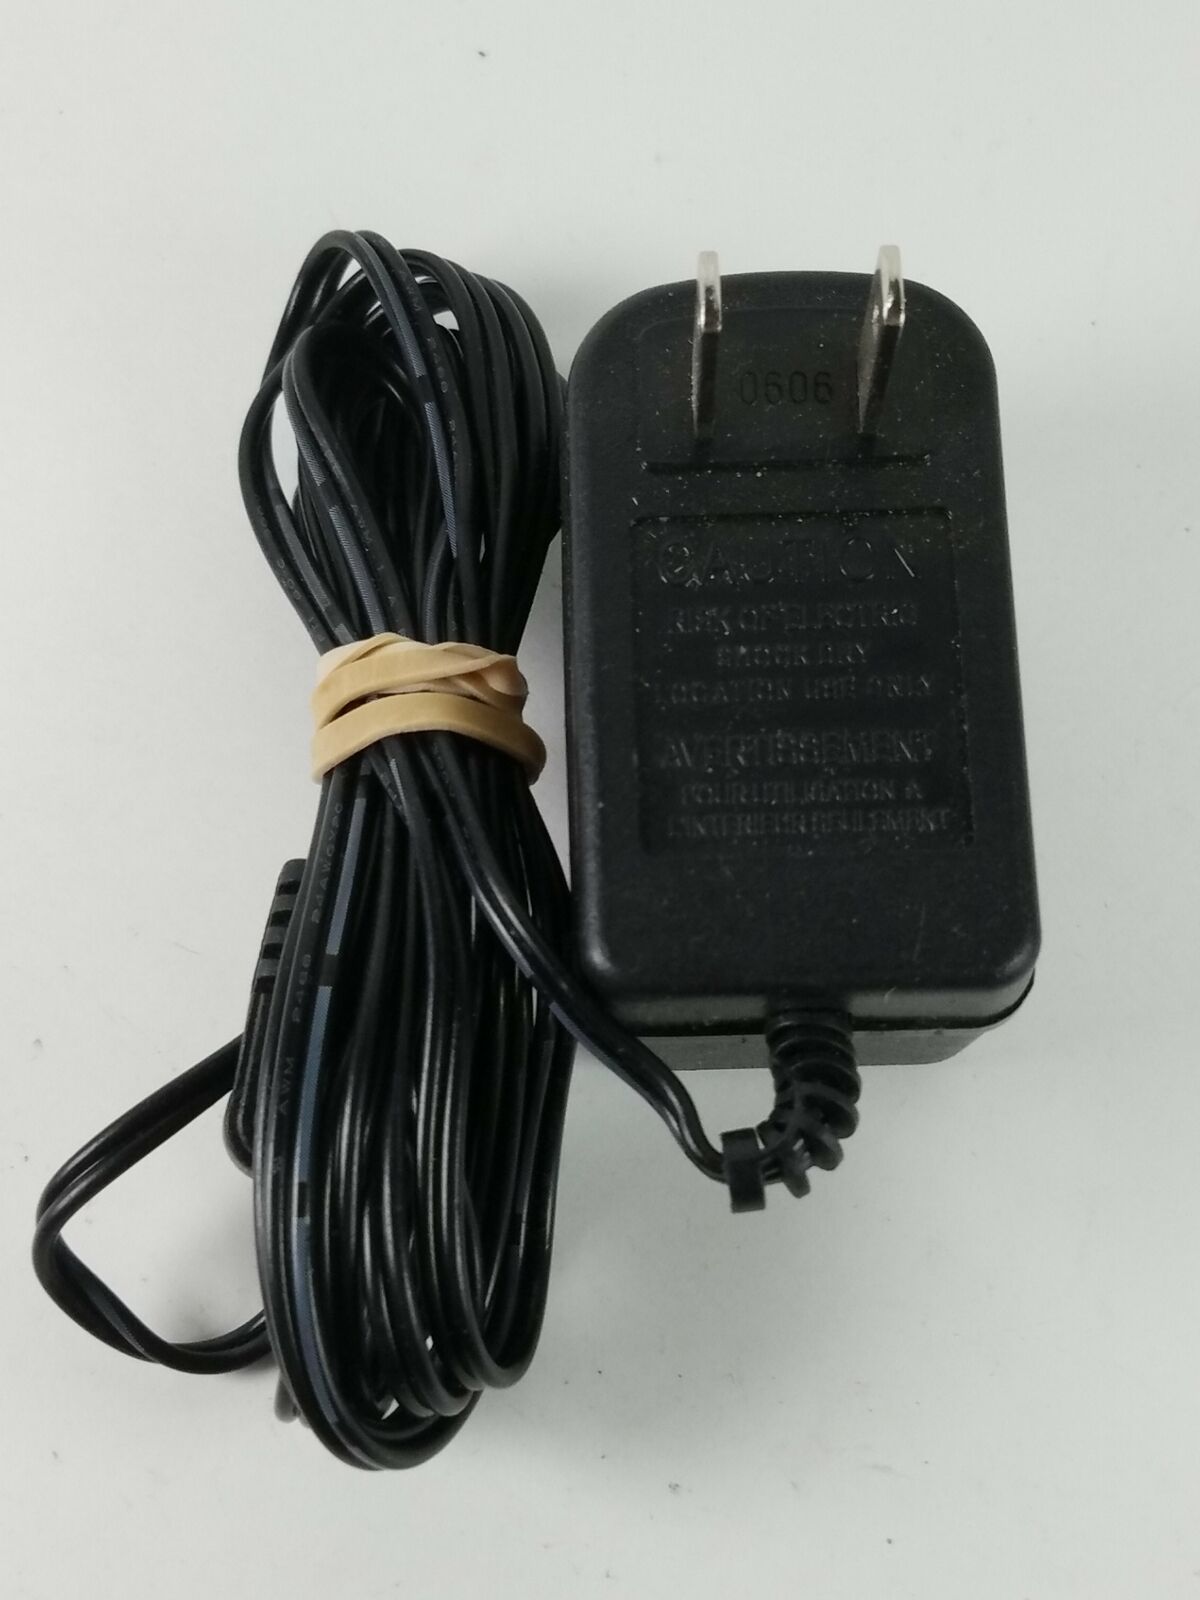 New AC Adapter MUA2809300 Charger Power Supply 9VAC 300mA